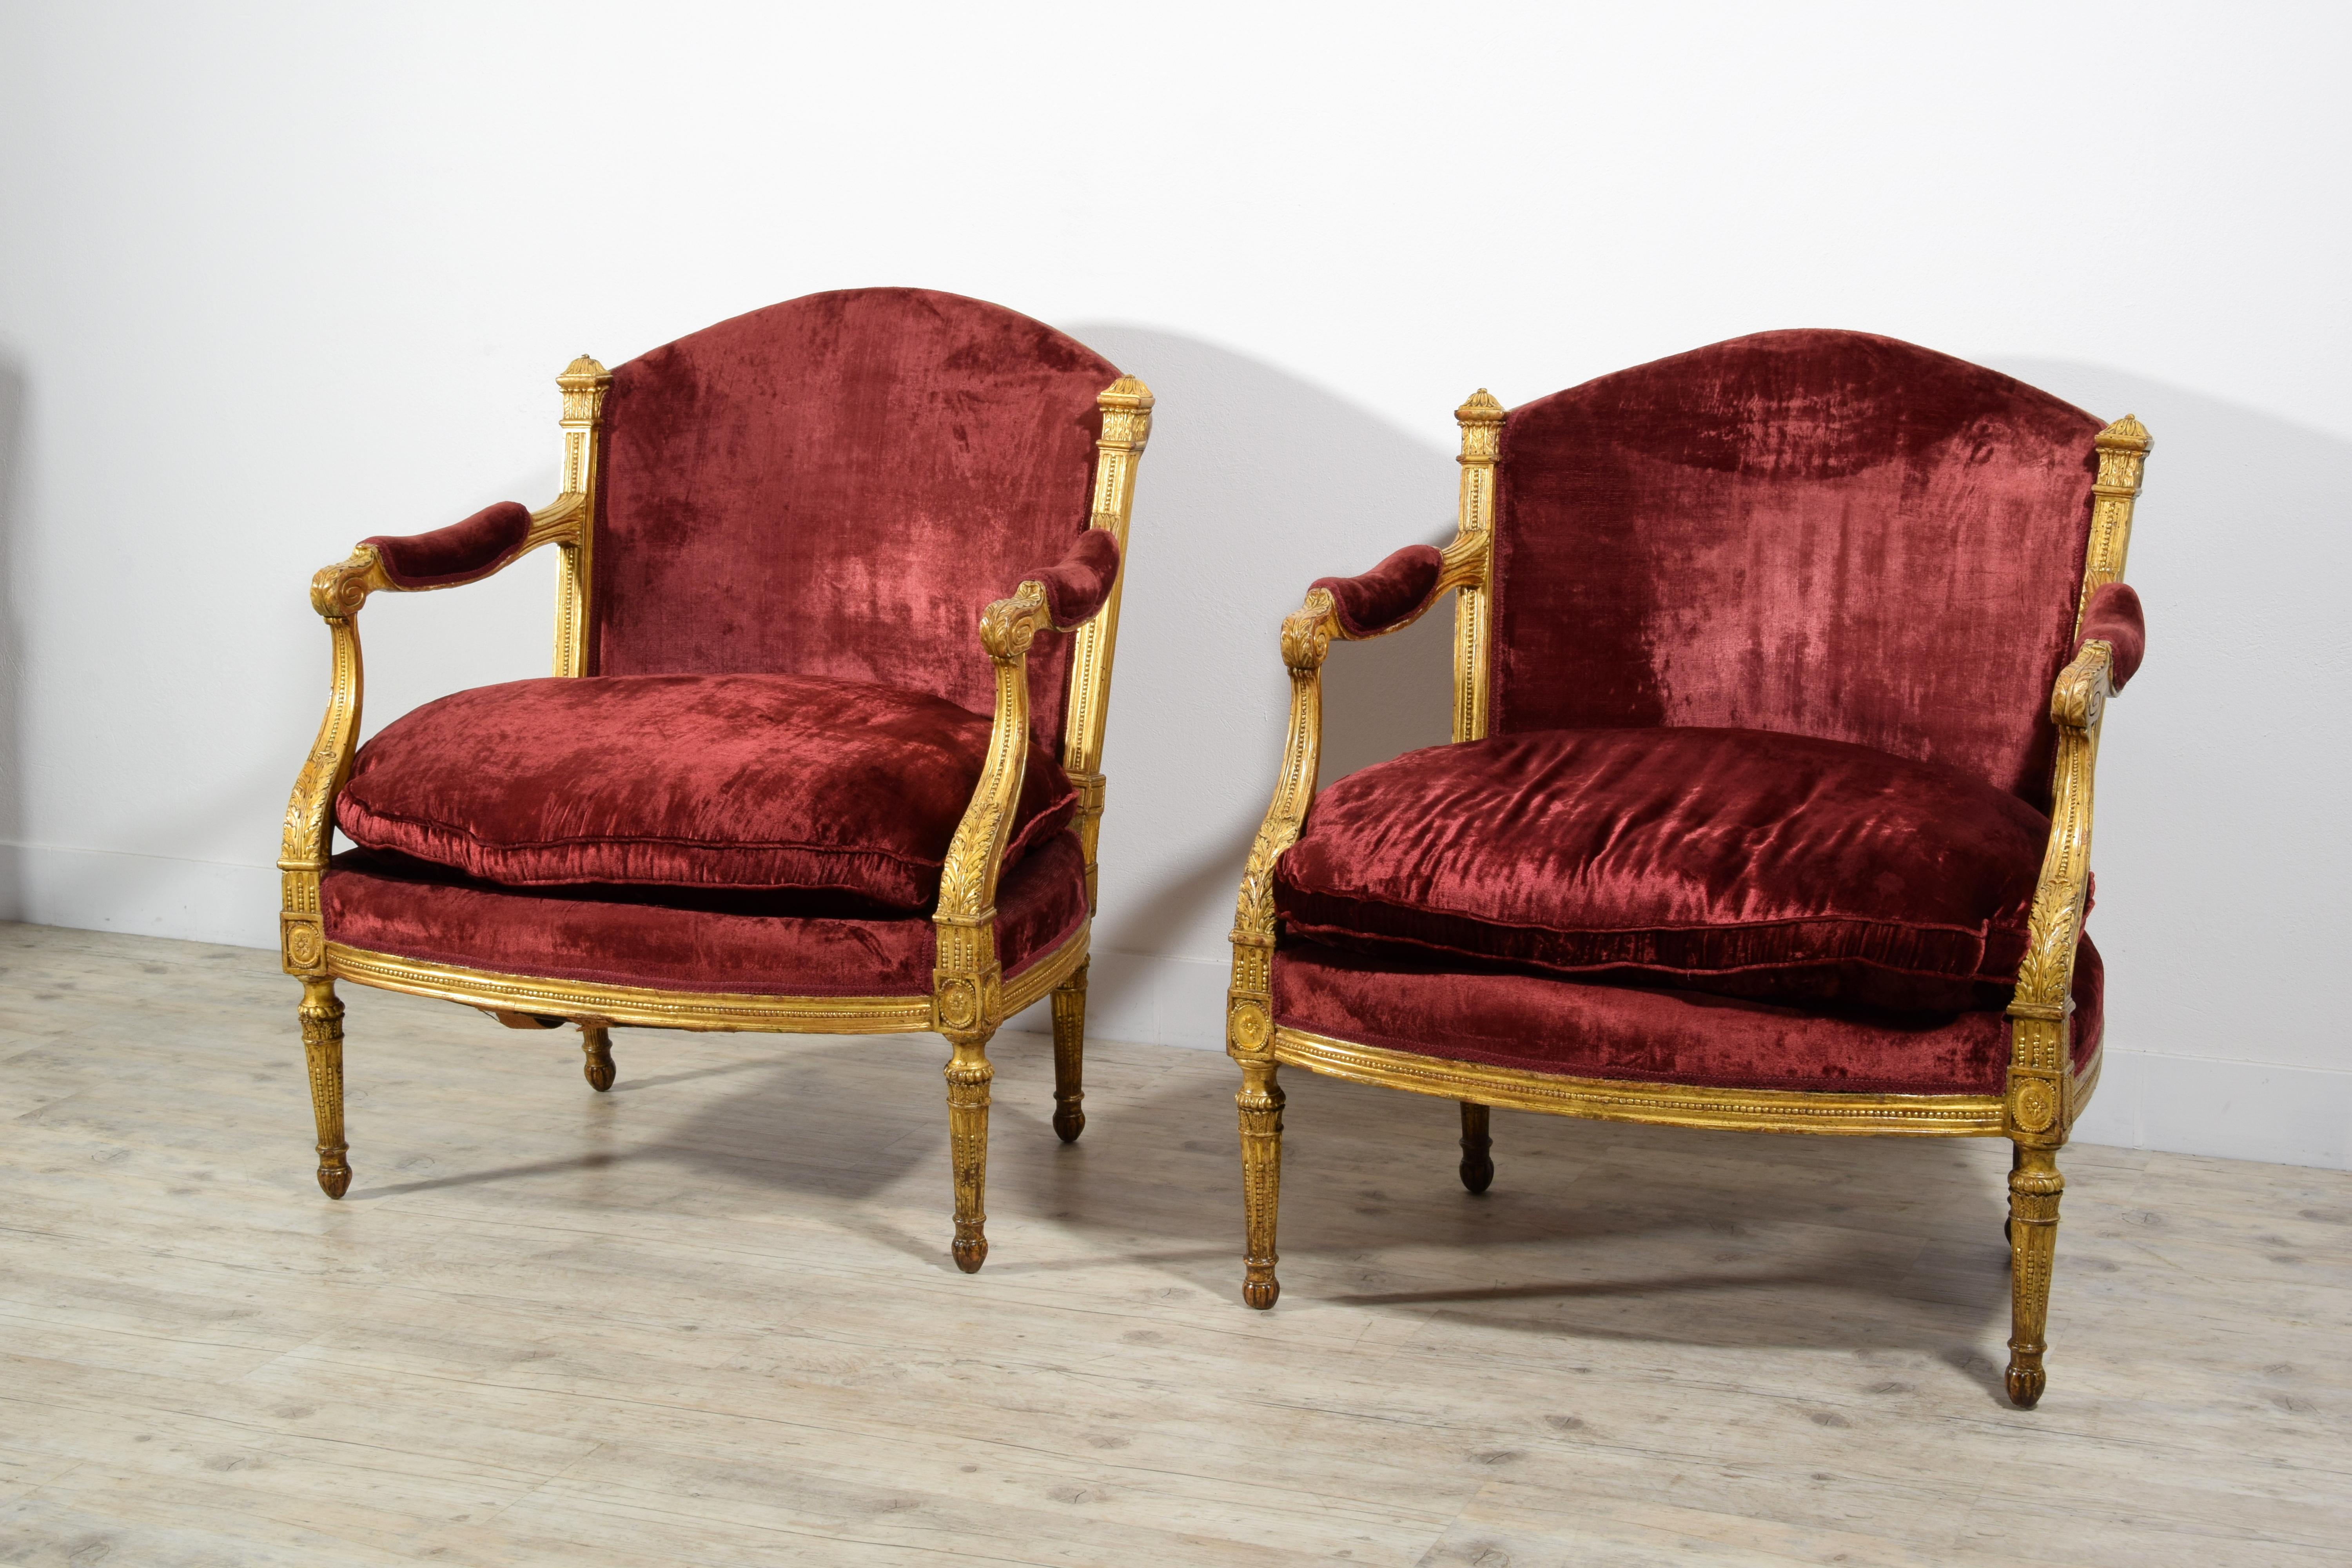 Neoclassical 18th century Pair of Italian Large Wood Armchairs 